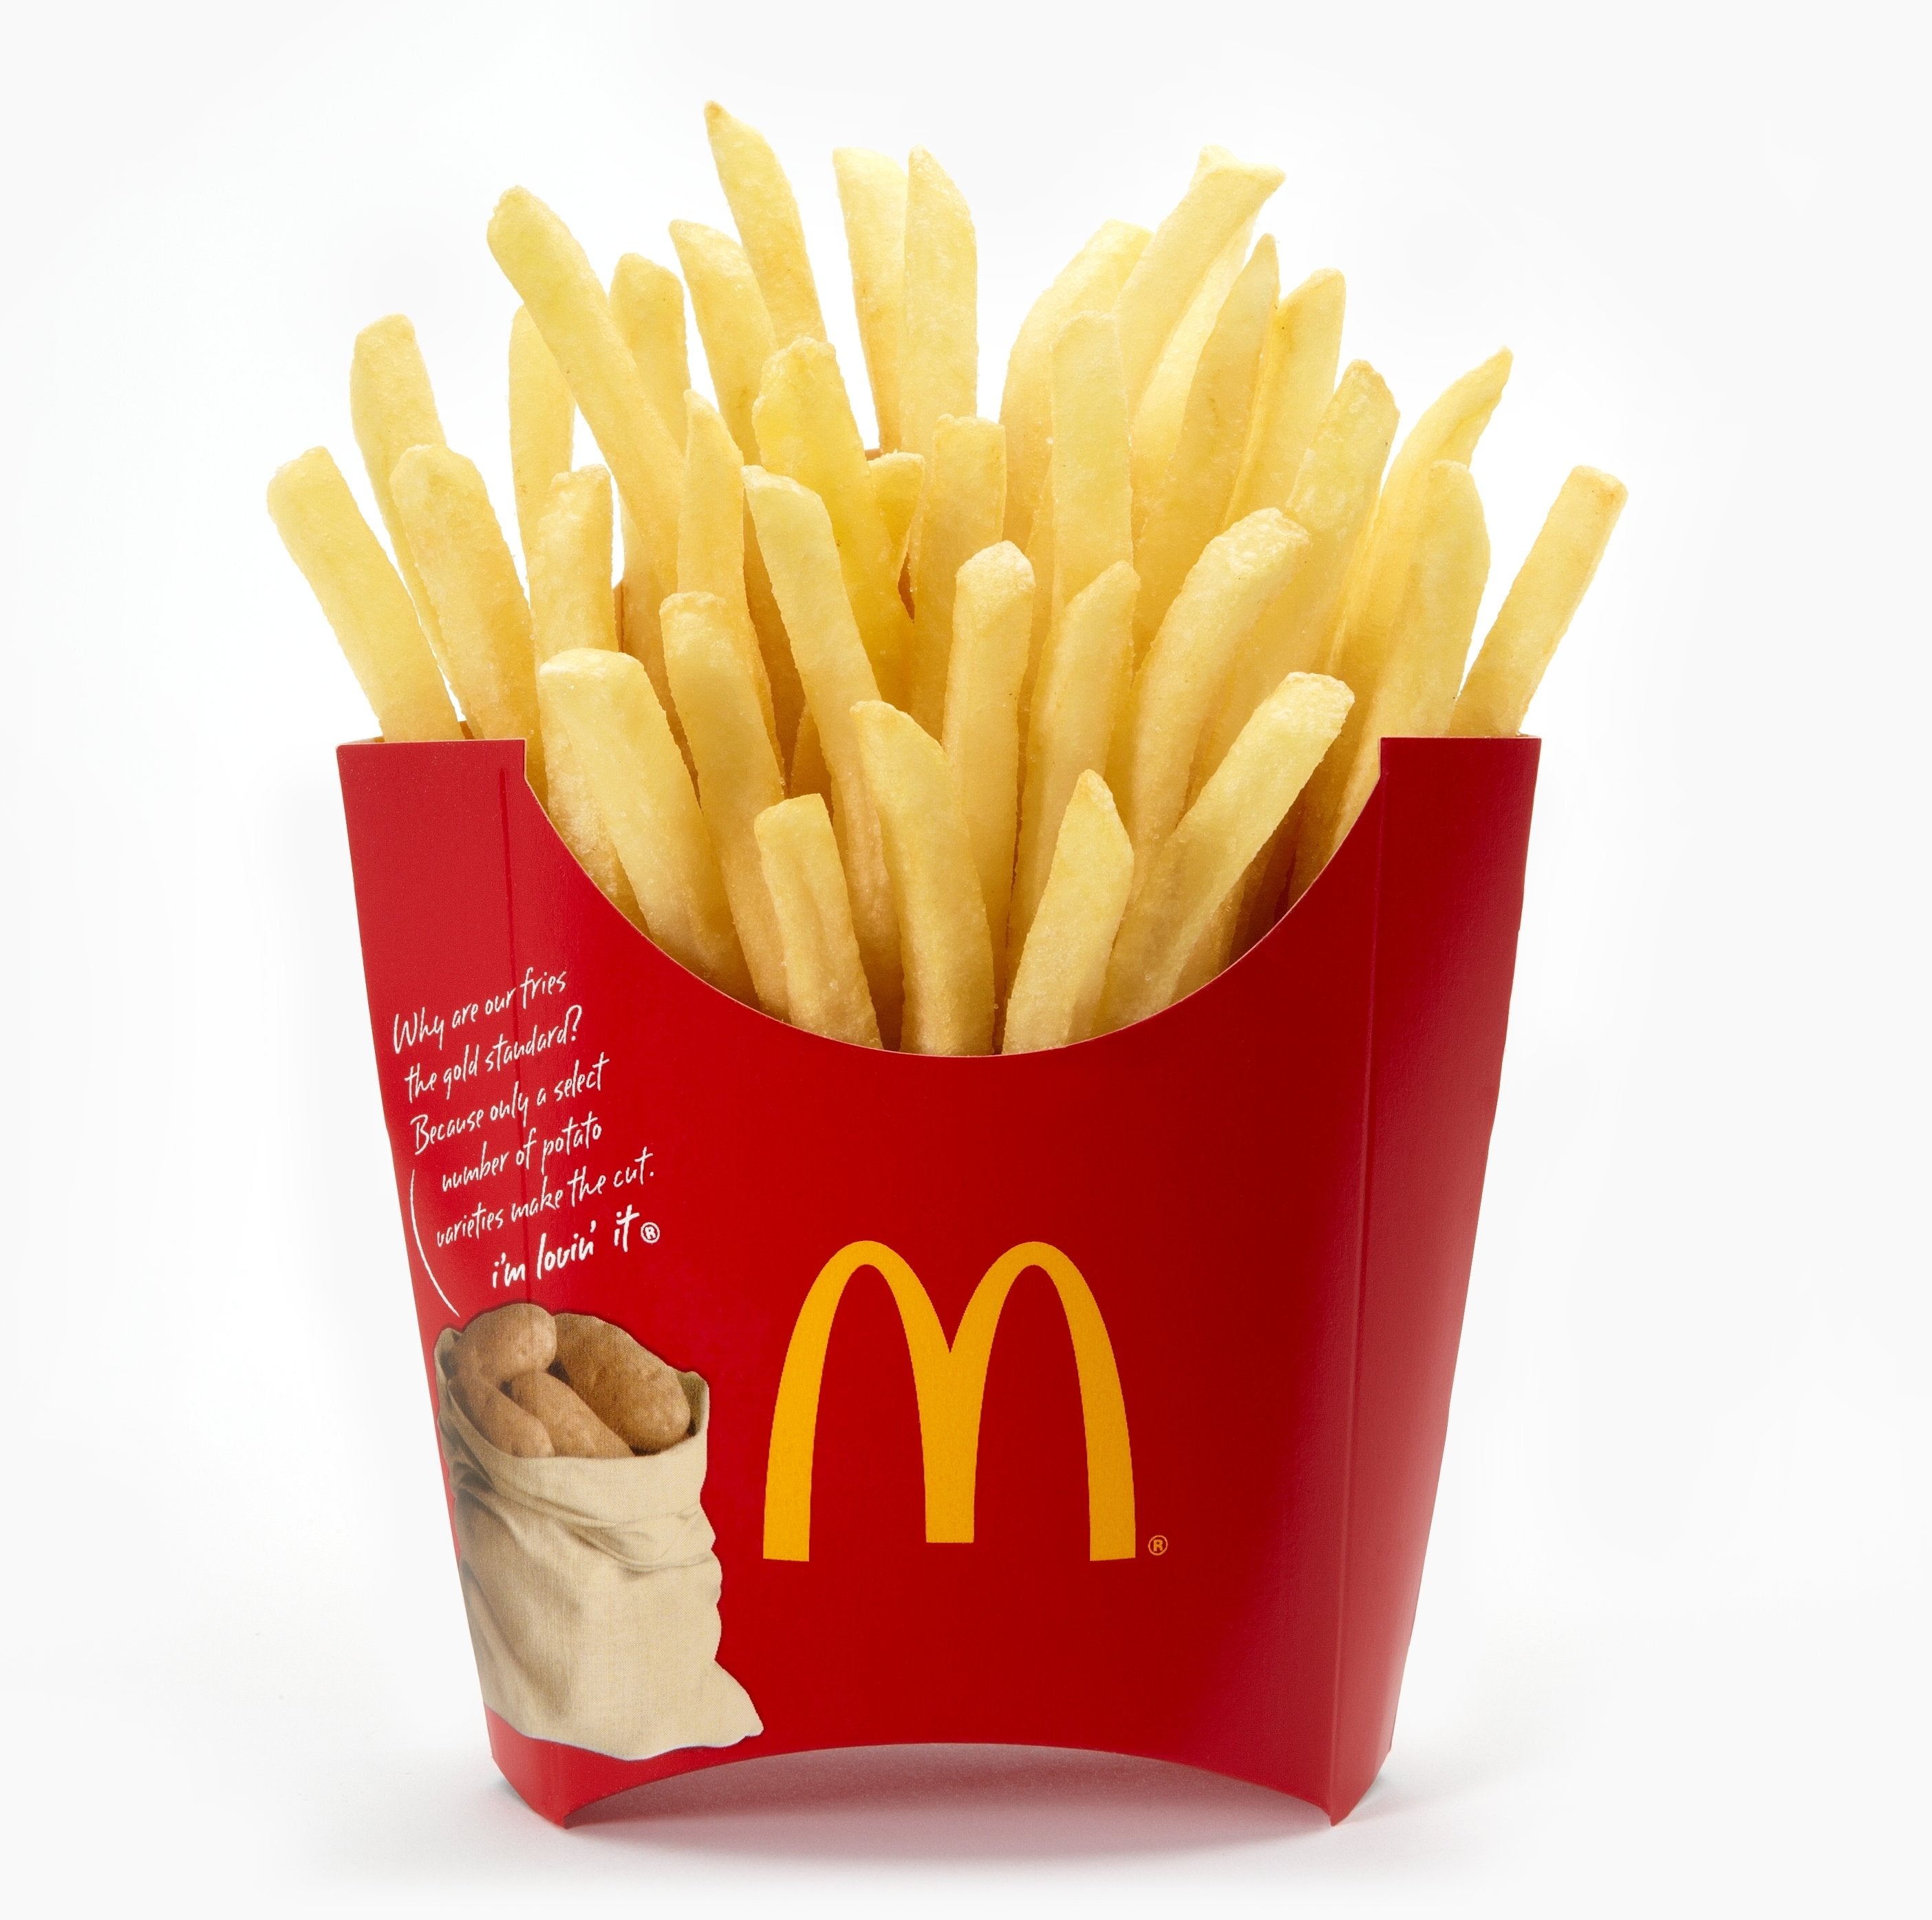 Score free McDonald's fries when you use Apple Pay - Here's how you can score free McDonald's fries just for using Apple Pay